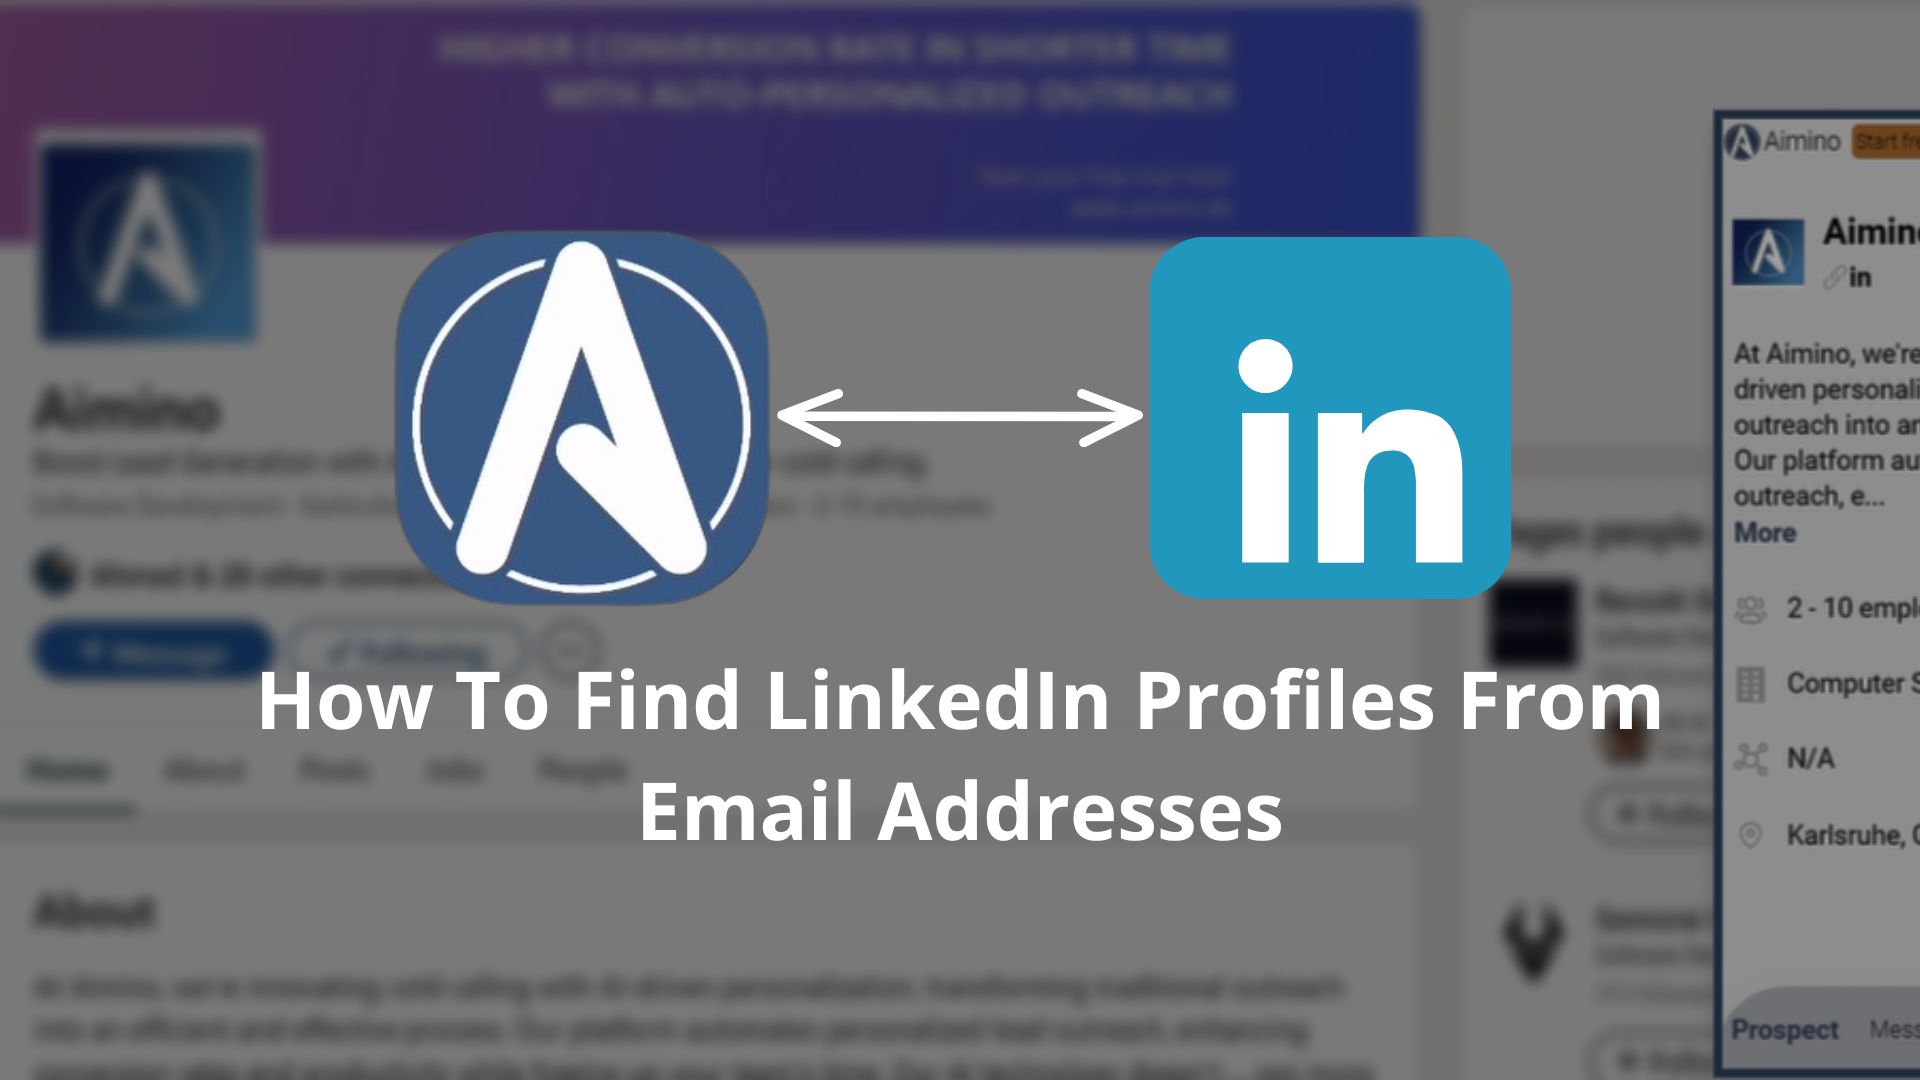 How To Find LinkedIn Profiles From Email Addresses